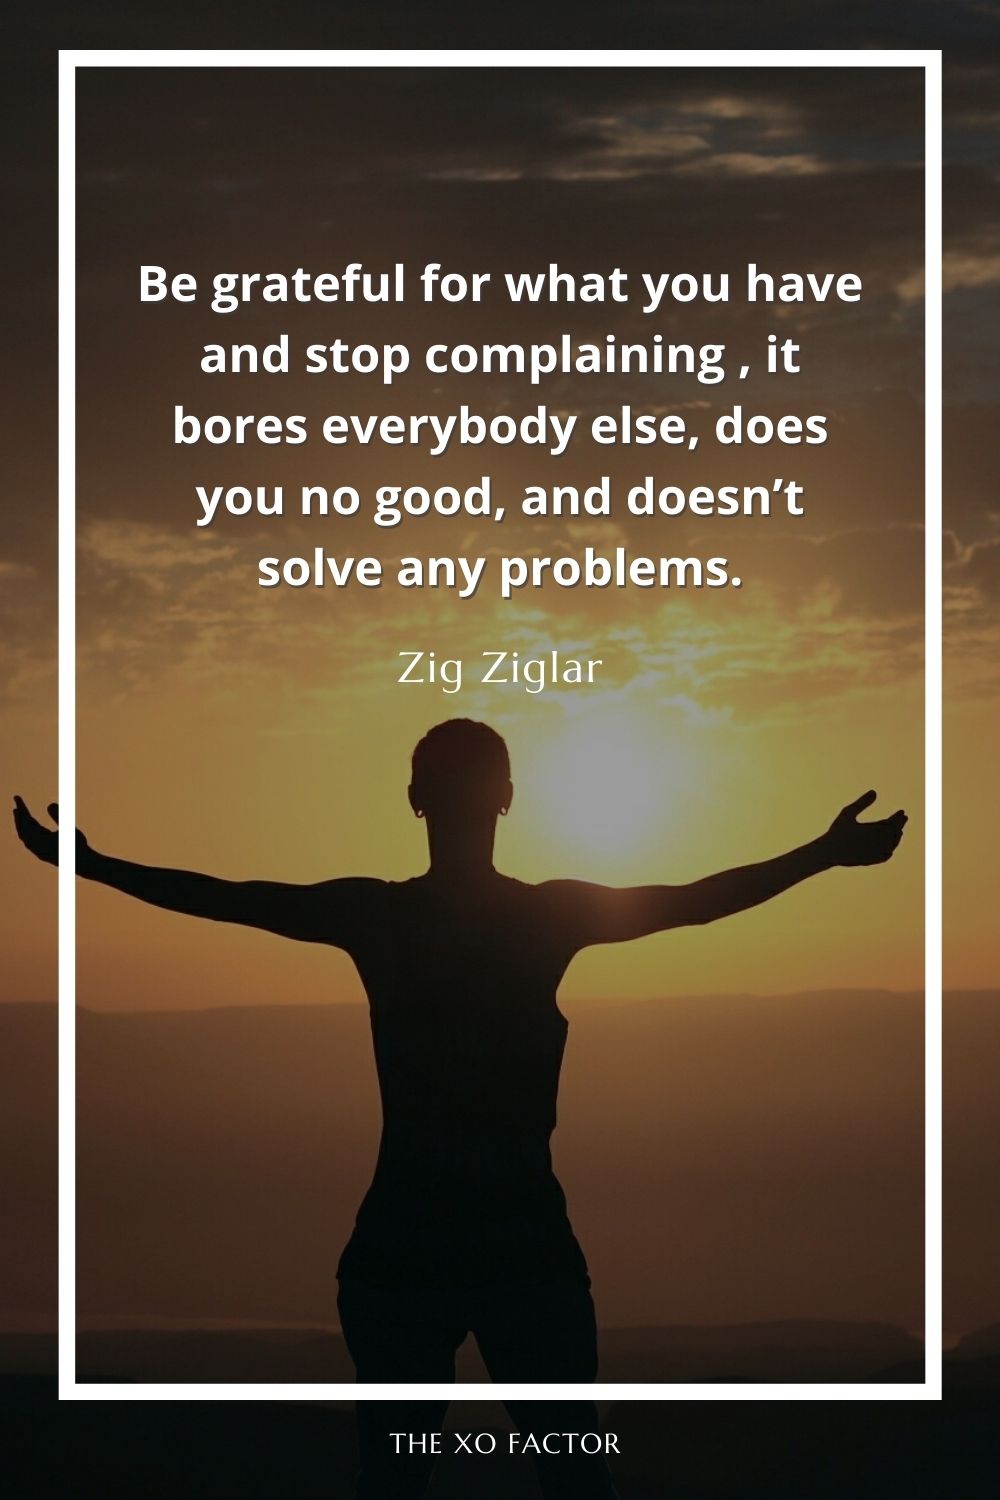 Be grateful for what you have and stop complaining , it bores everybody else, does you no good, and doesn’t solve any problems.